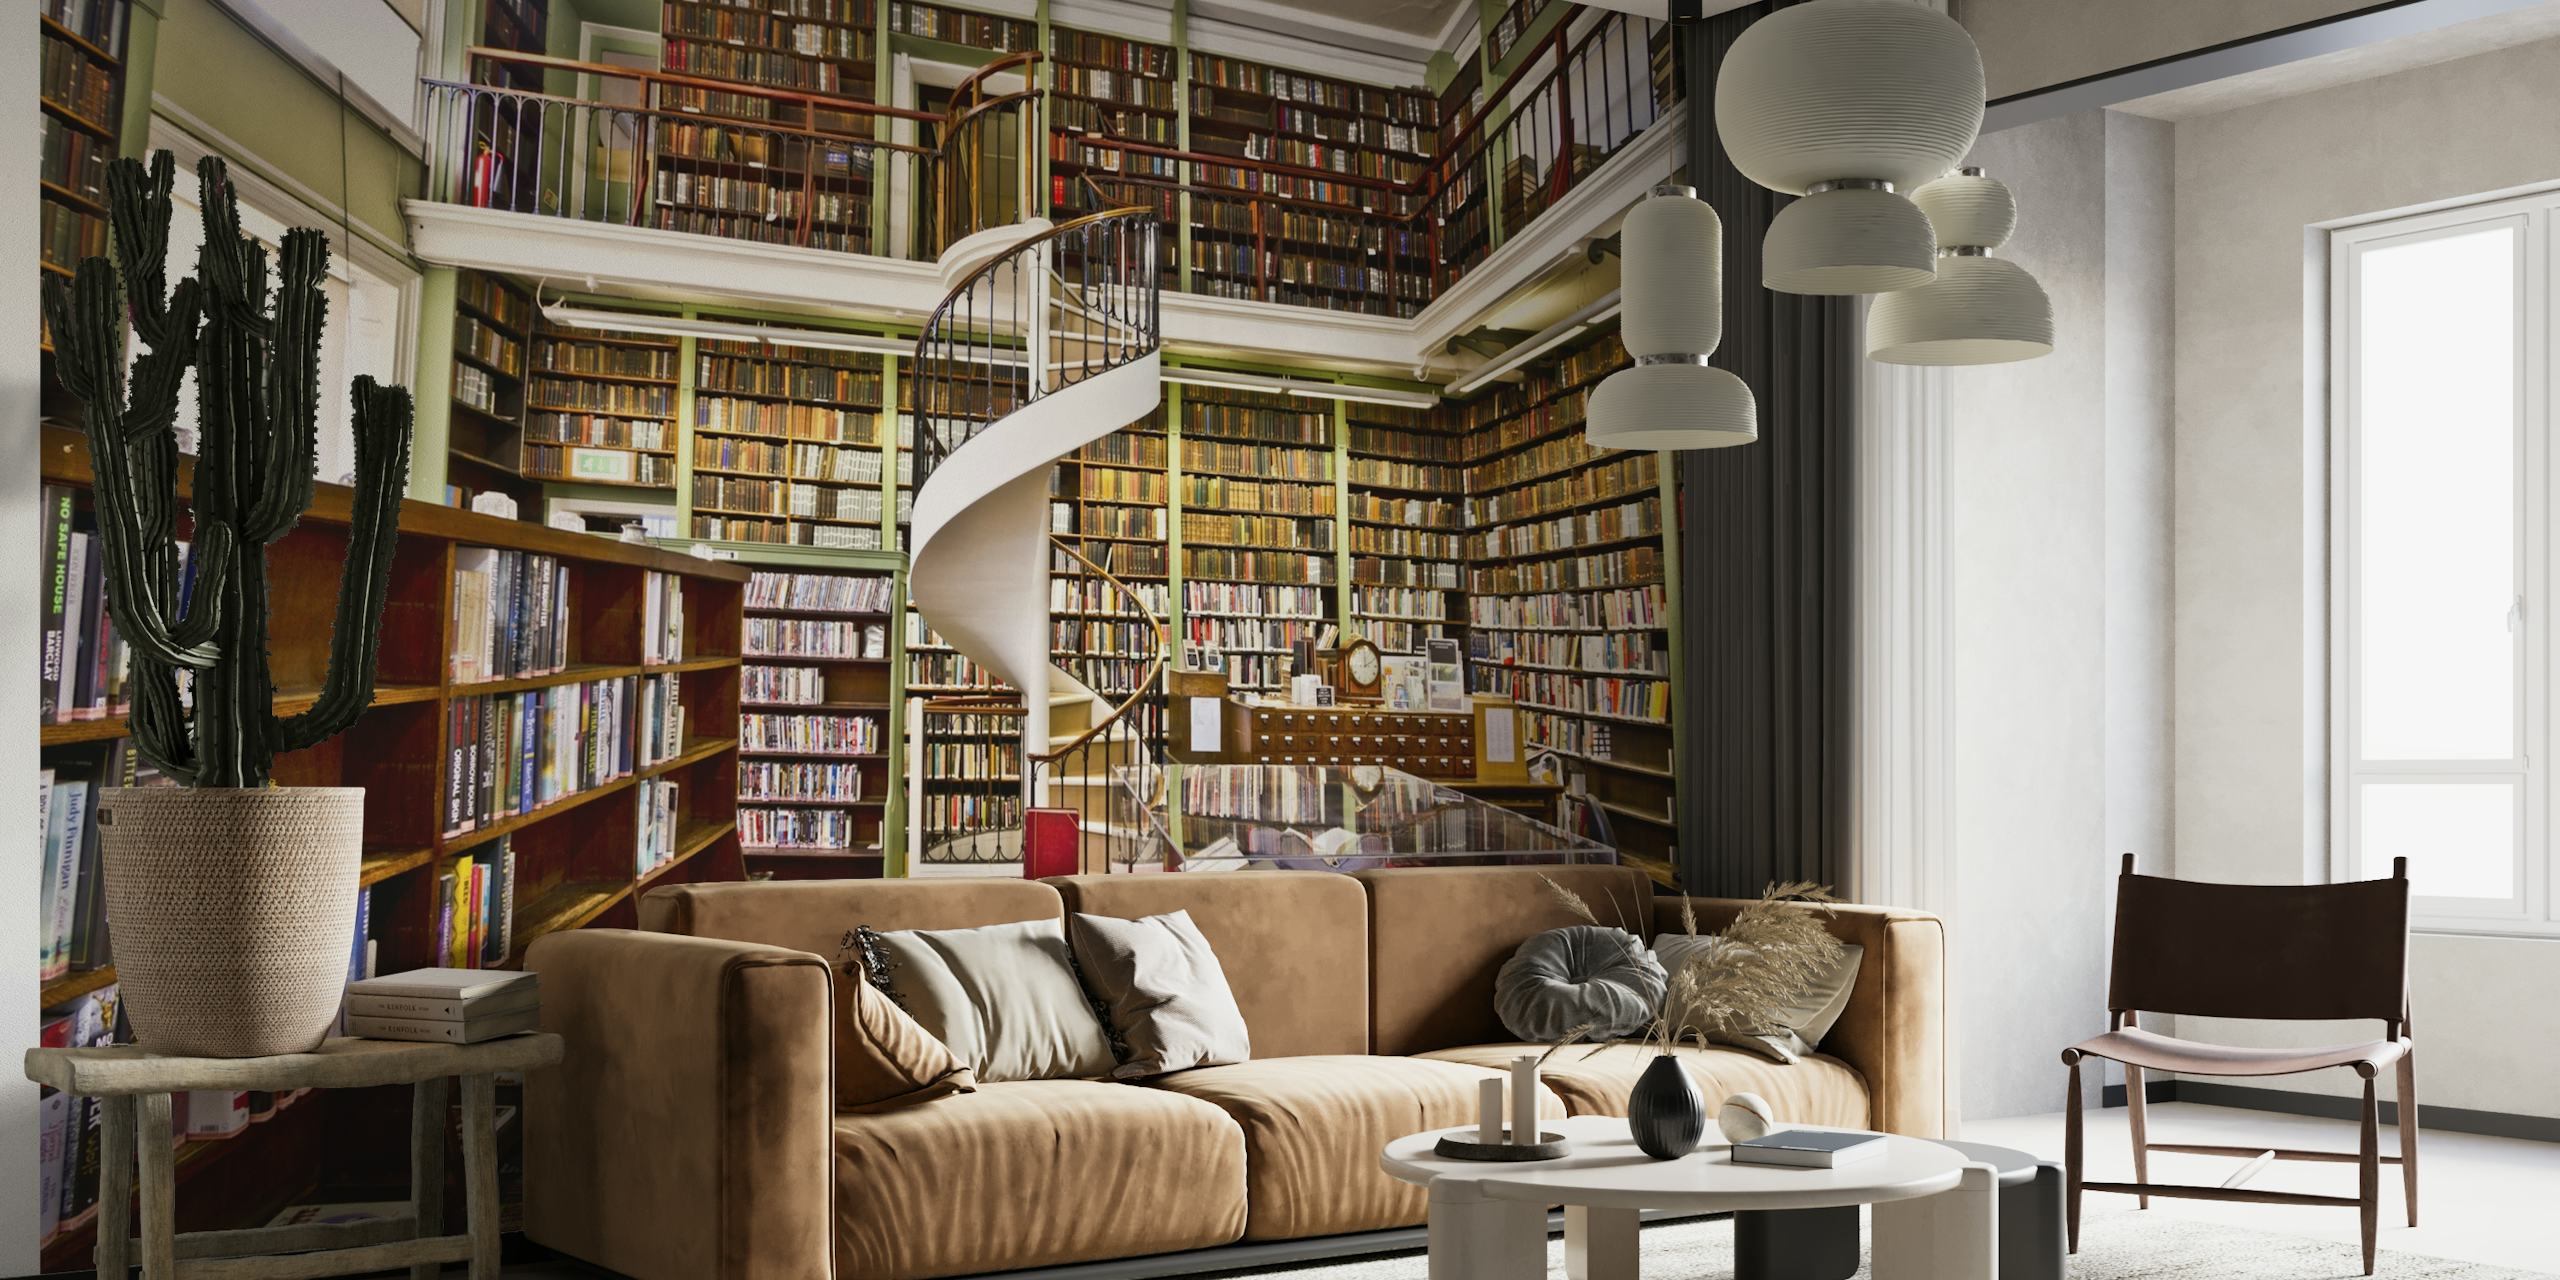 Wall mural of a cozy library with bookshelves and a spiral staircase